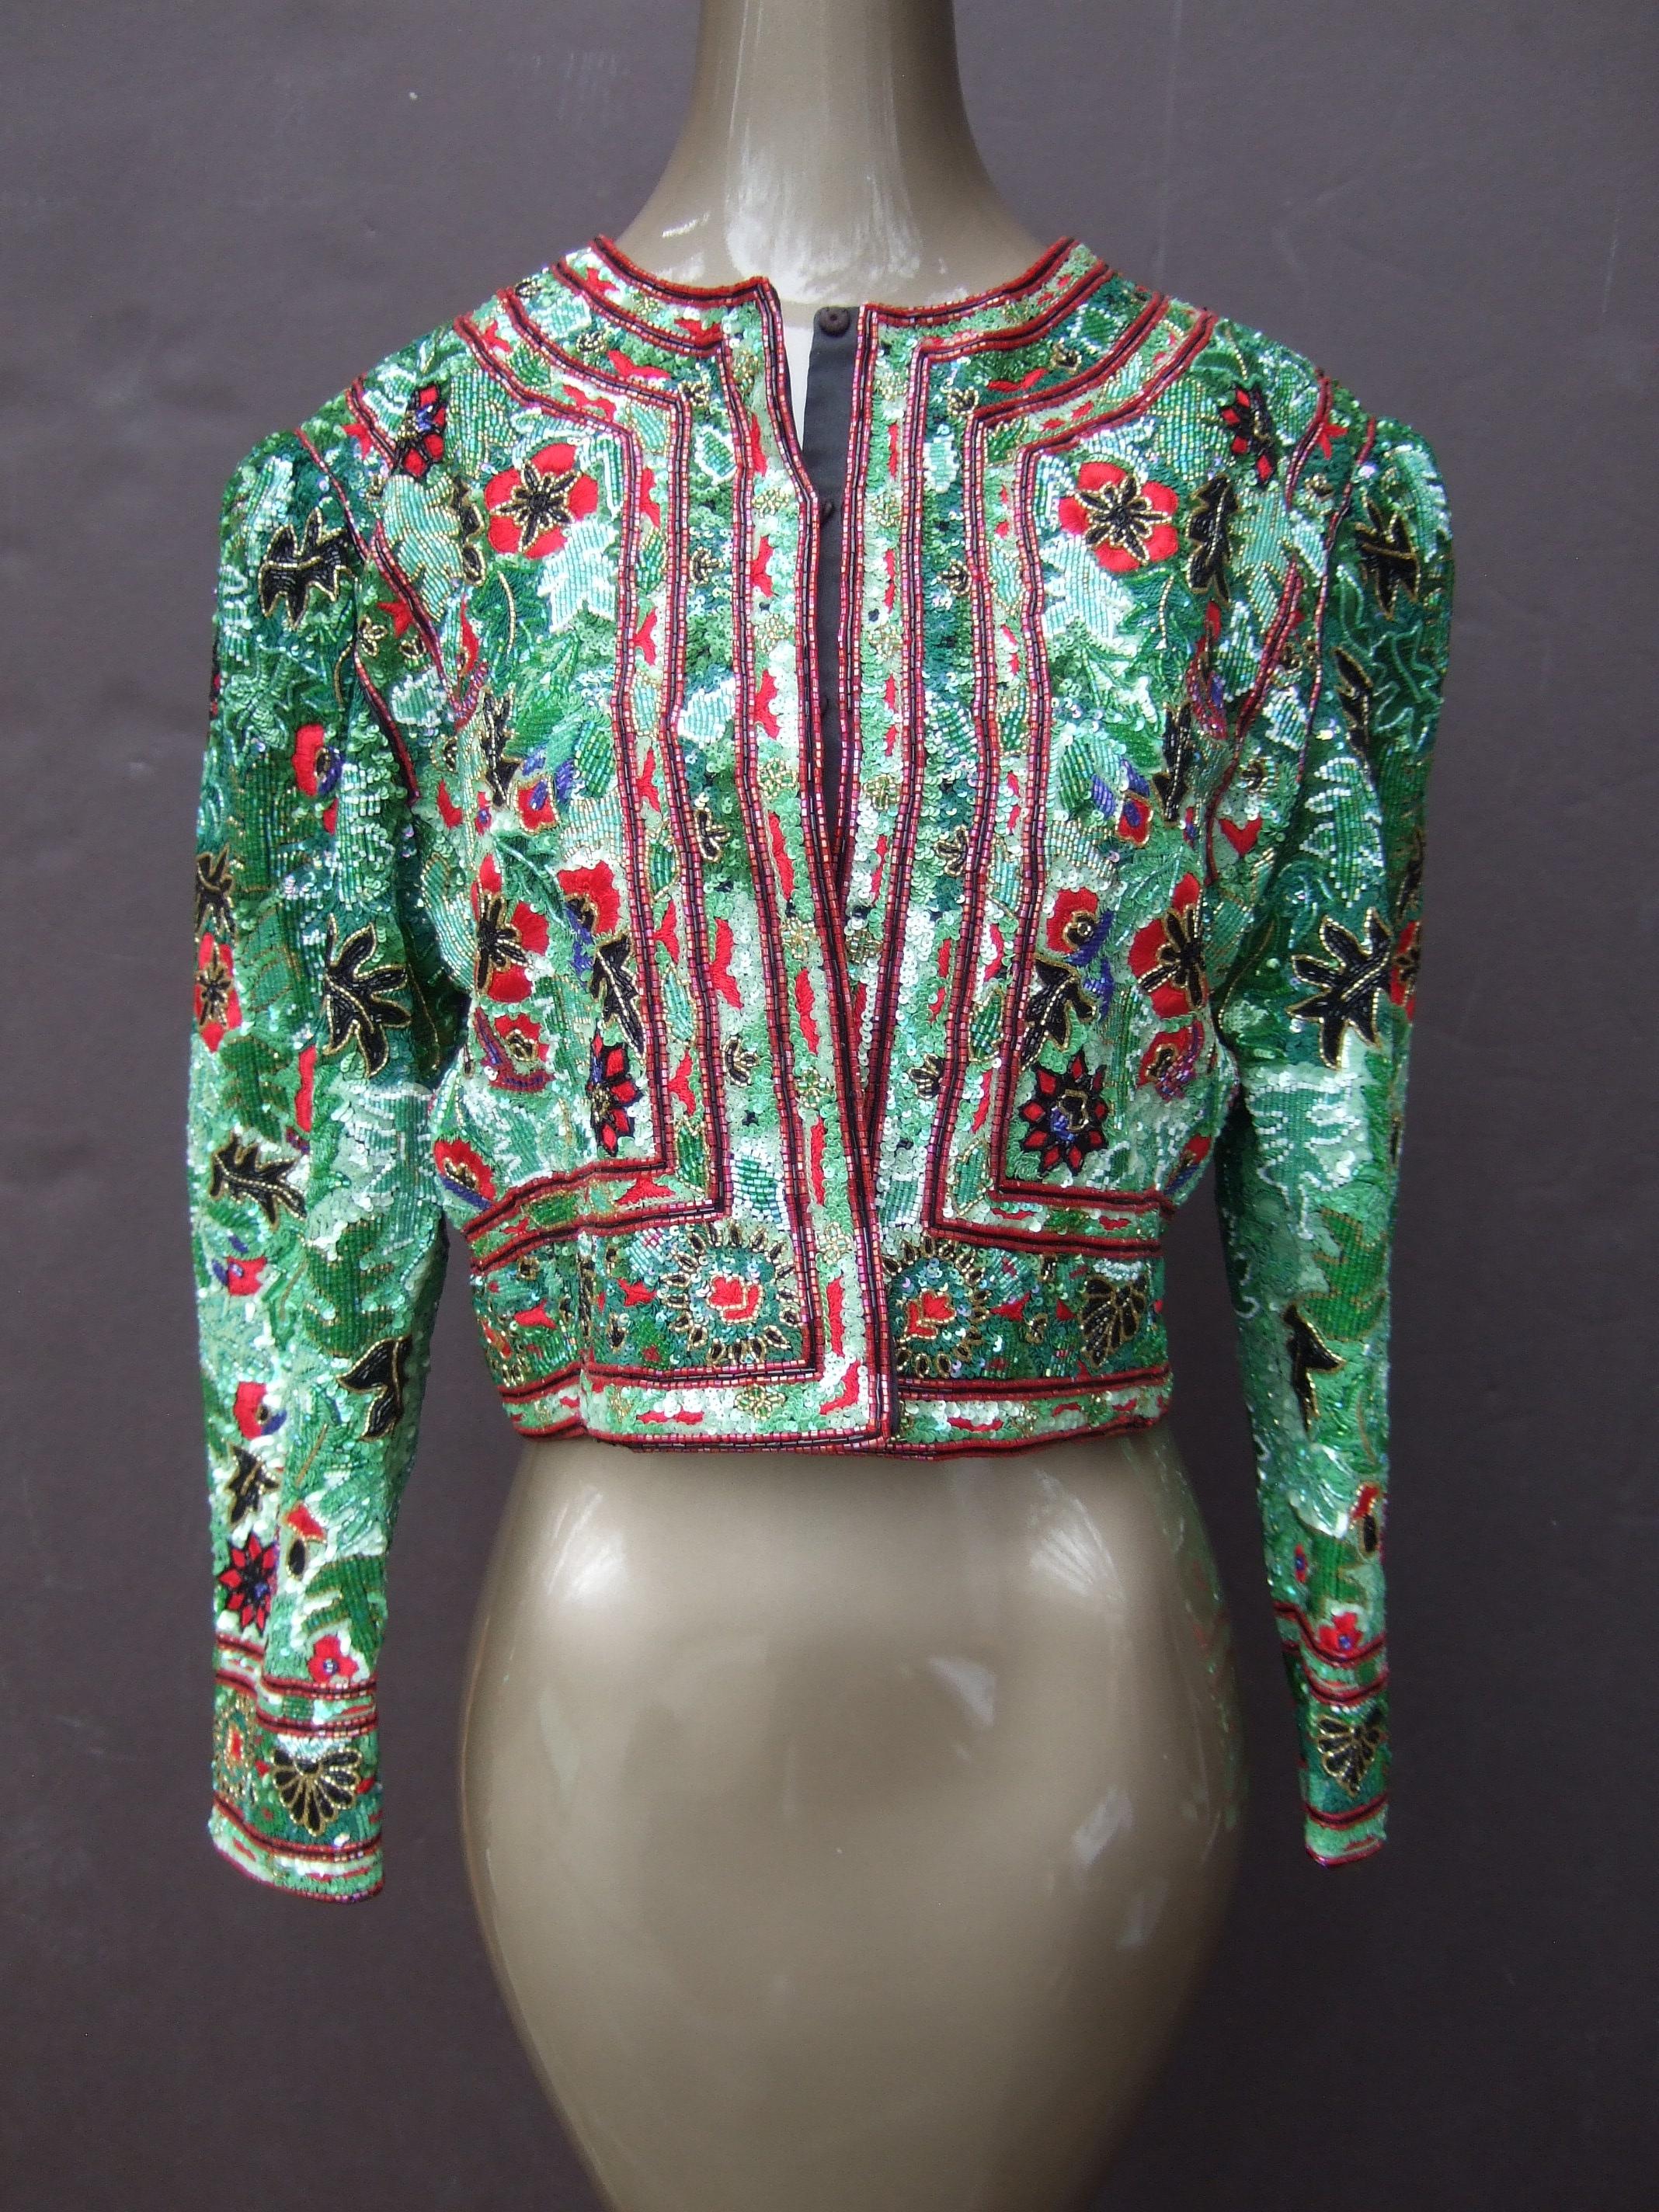 Exquisite Elaborate Glass Floral Beaded Embroidered Bolero Jacket c 1980s For Sale 7